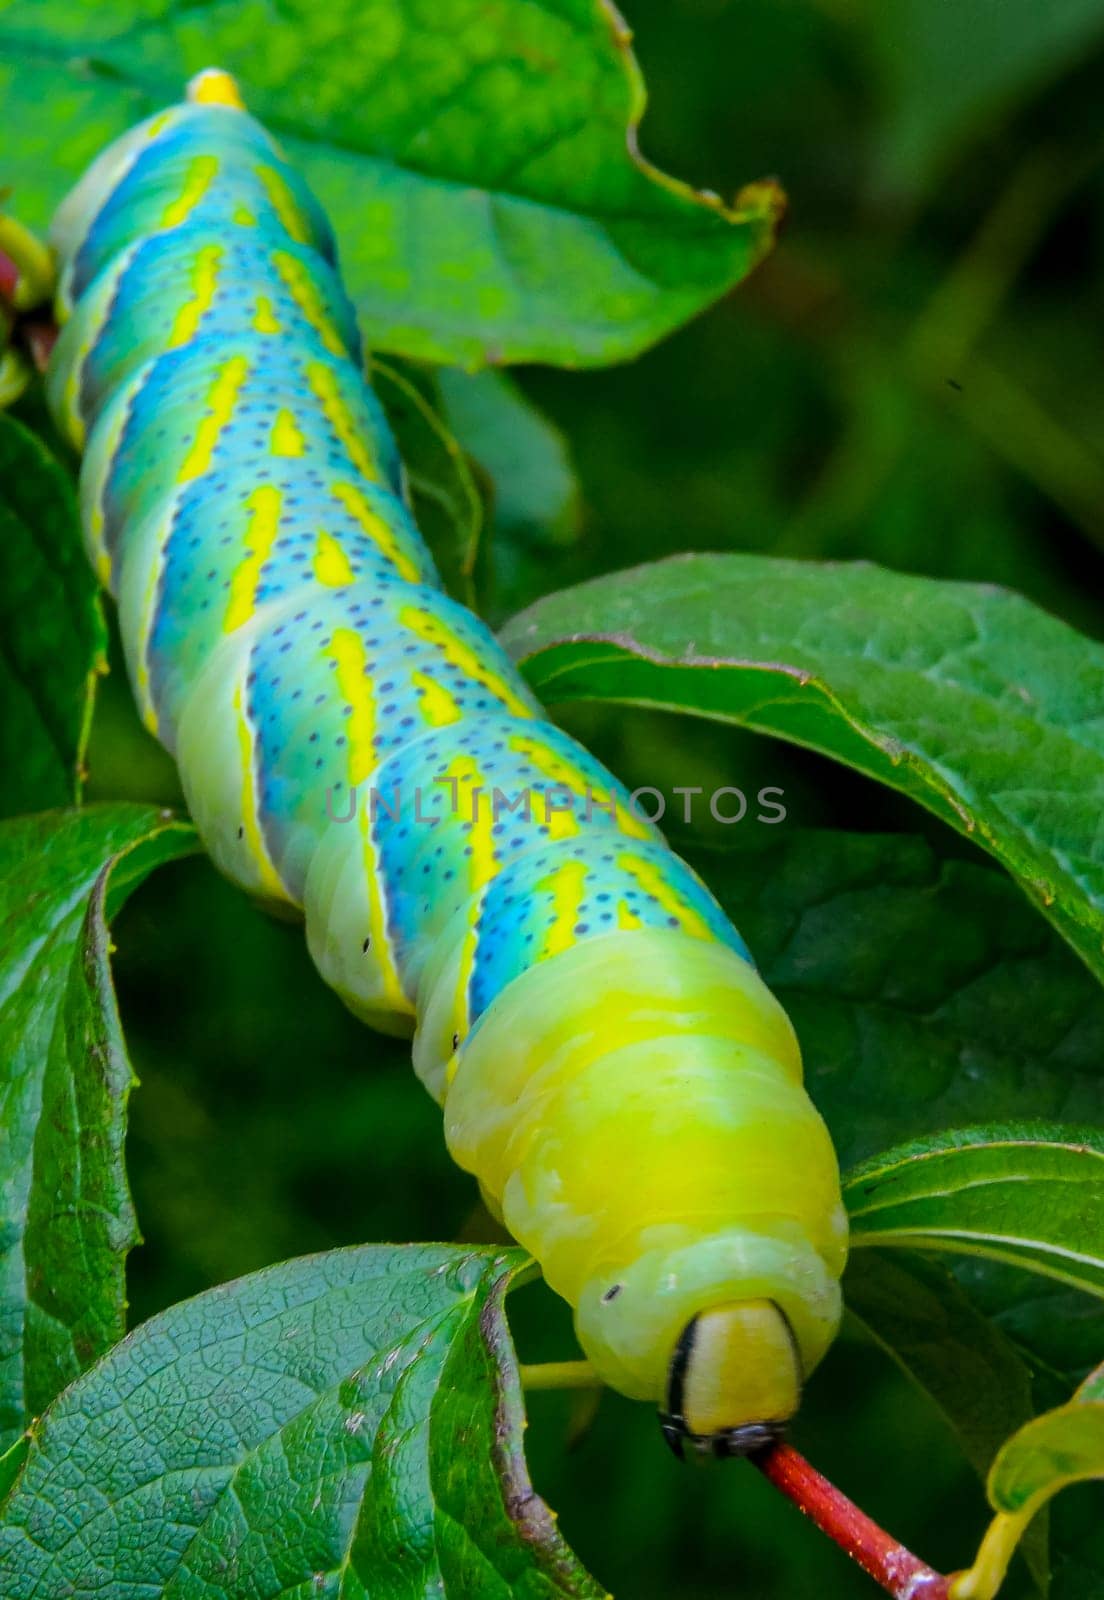 The African death's-head hawkmoth (Acherontia atropos), A nocturnal butterfly caterpillar crawls on the red stem of a plant by Hydrobiolog